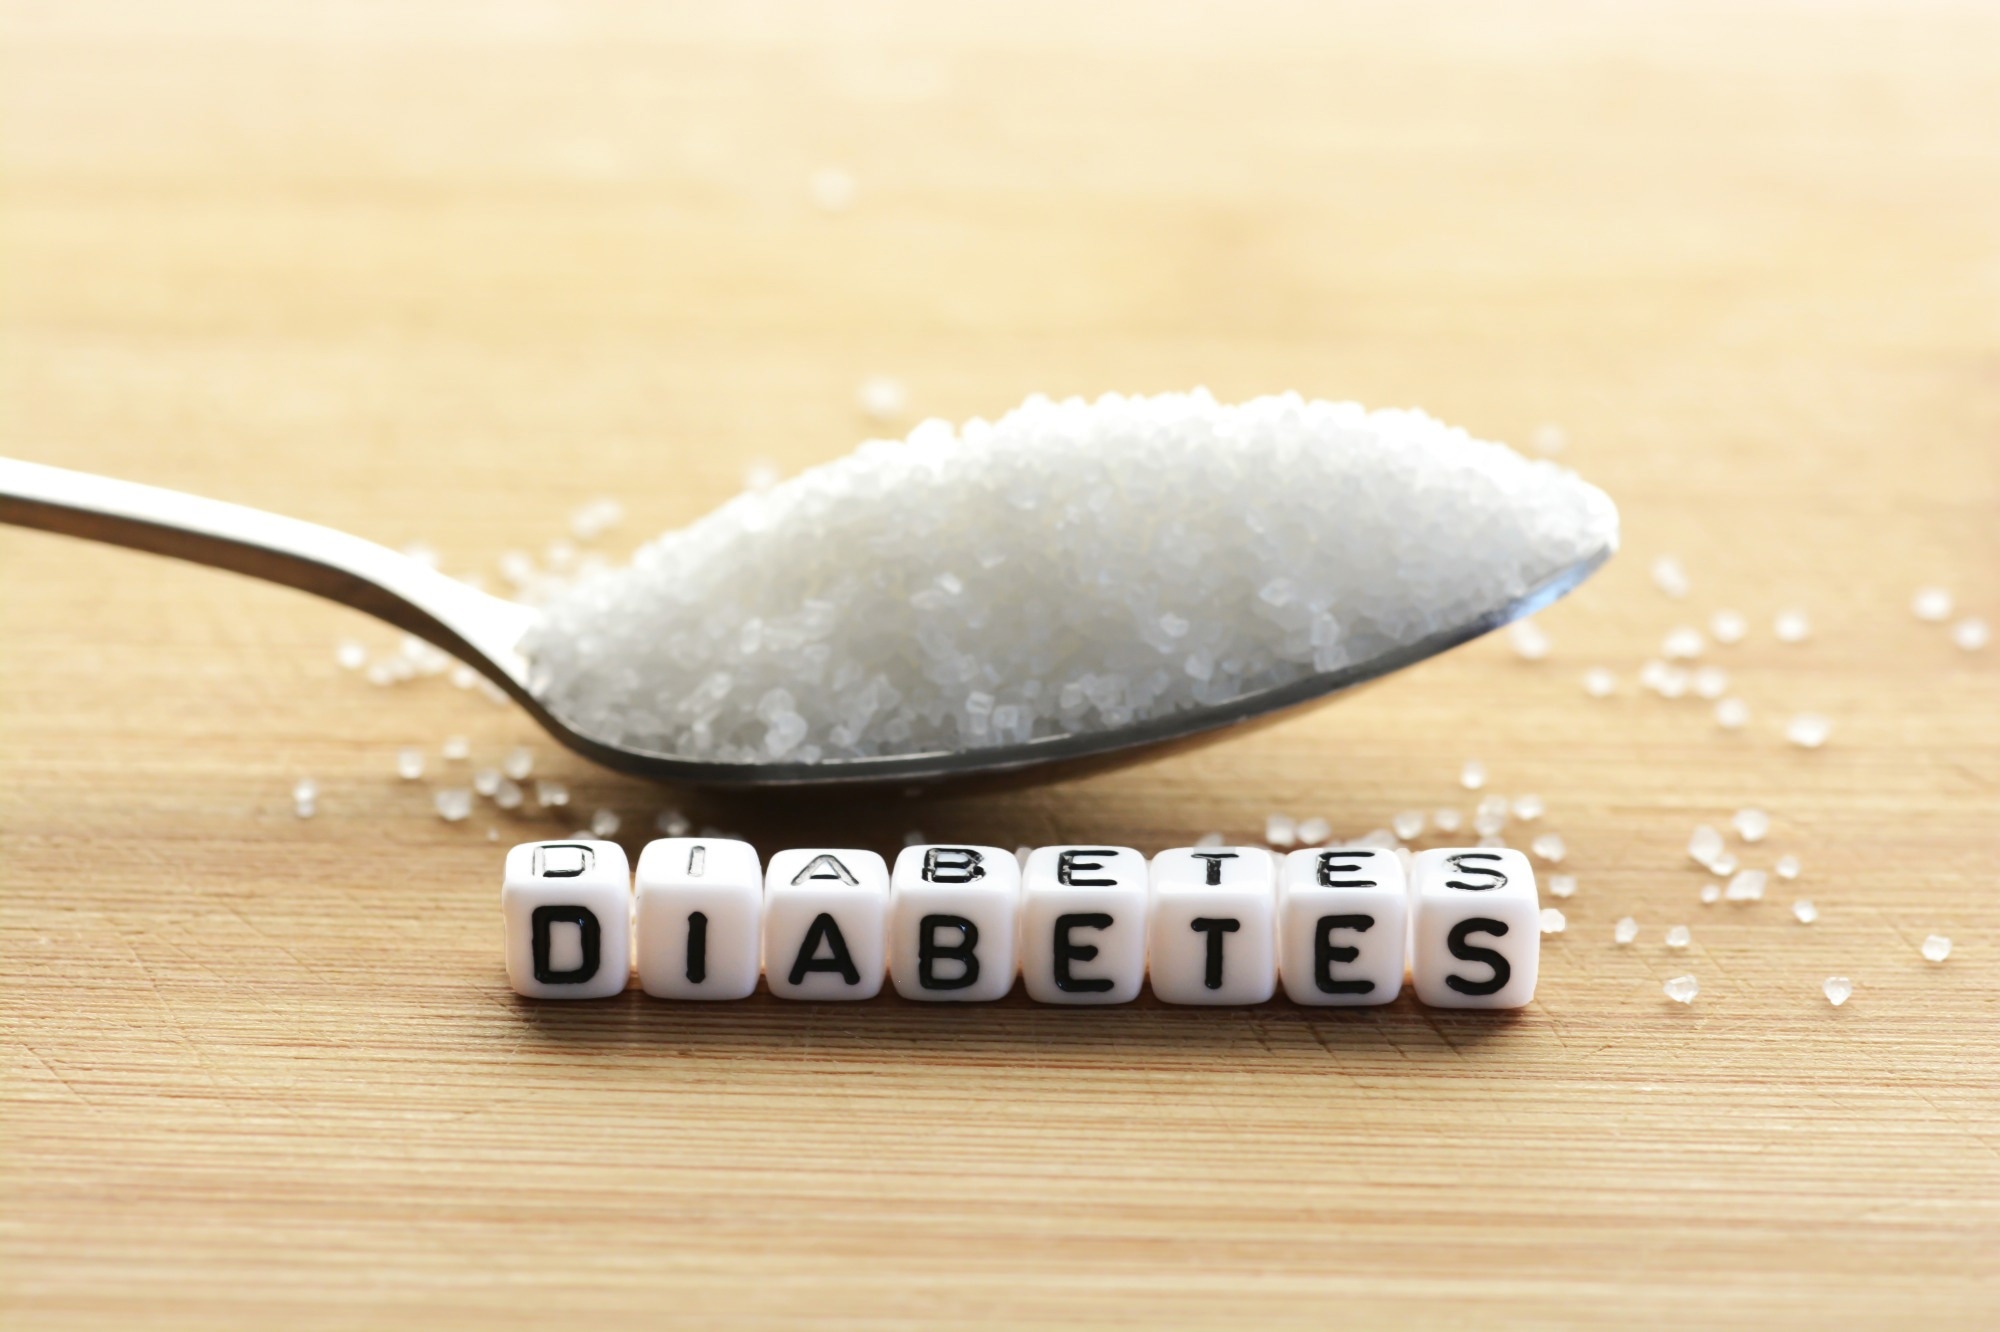 Study: CT-based measurement of visceral adipose tissue volume as a reliable tool for assessing metabolic risk factors in prediabetes across subtypes. Image Credit: Eviart/Shutterstock.com